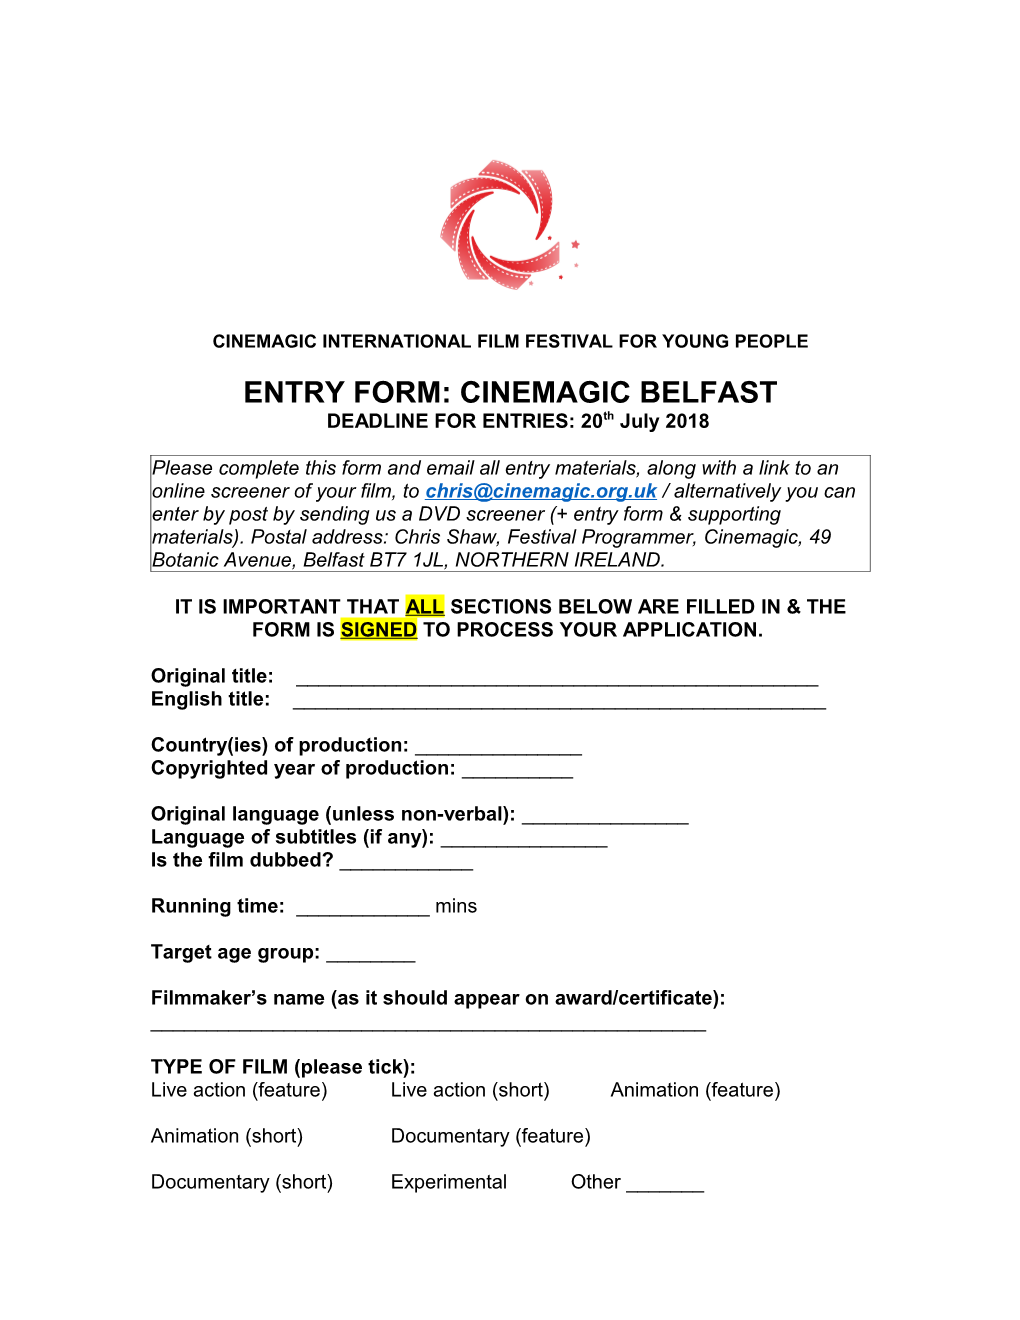 Cinemagic International Film Festival for Young People